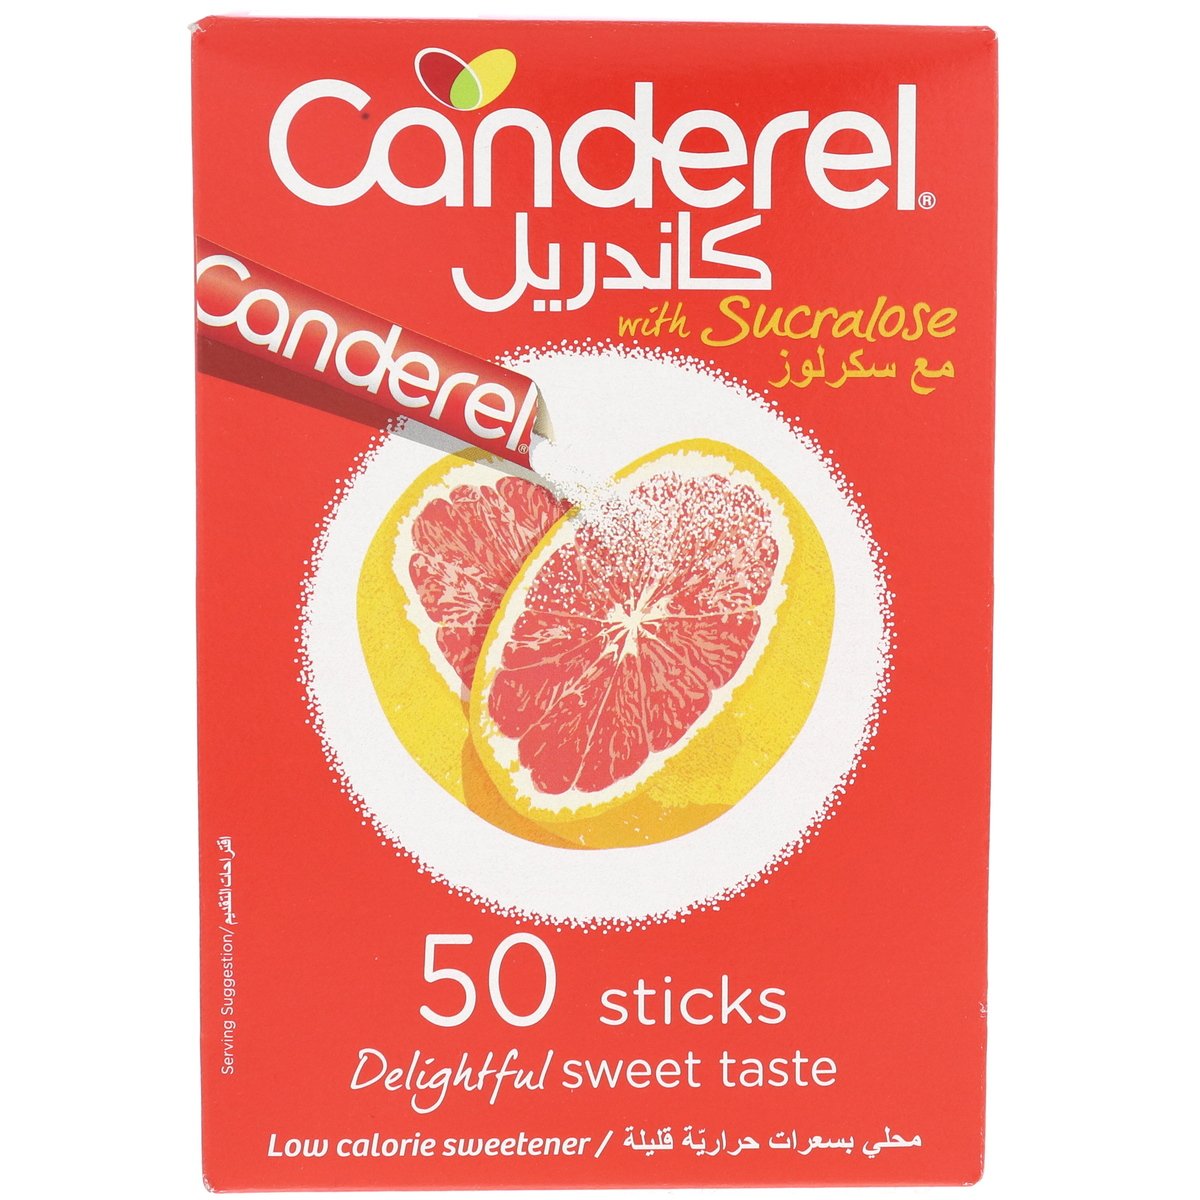 Canderel Low Calorie Sweetener With Sucralose 50 pcs